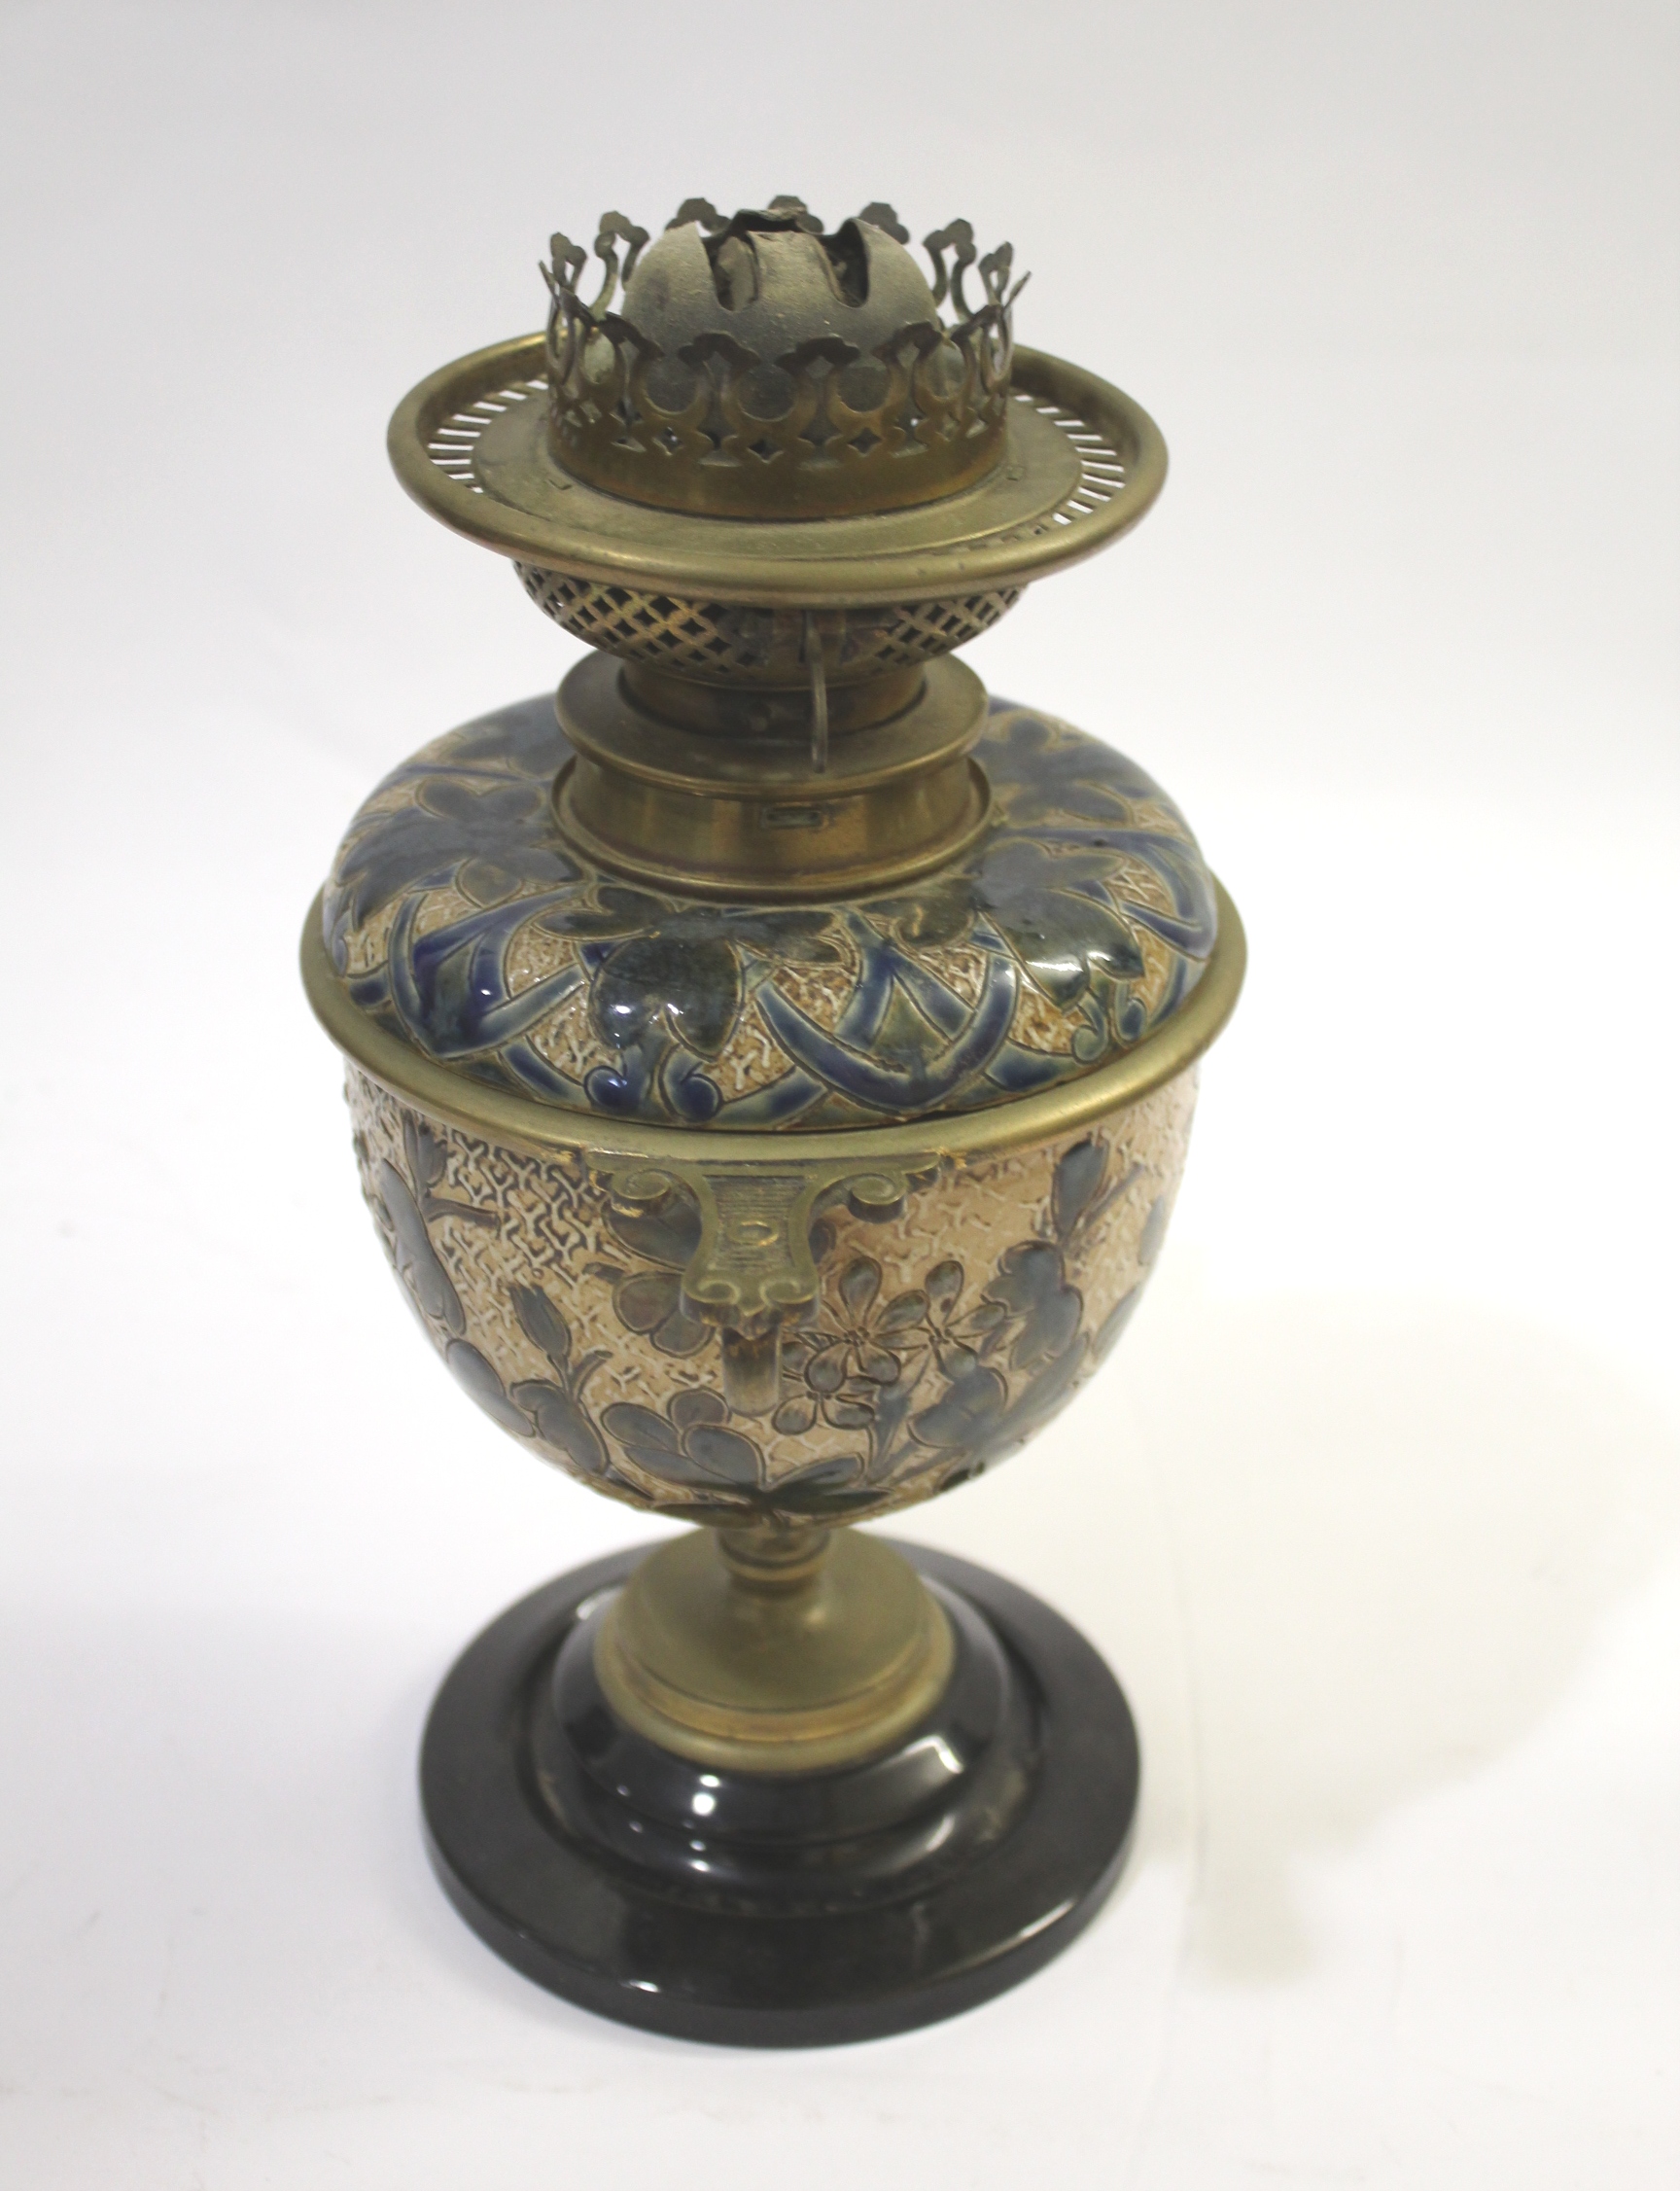 DOULTON LAMBETH OIL LAMP - 1882 a pottery and brass mounted oil lamp, with a removable font. With - Image 3 of 9